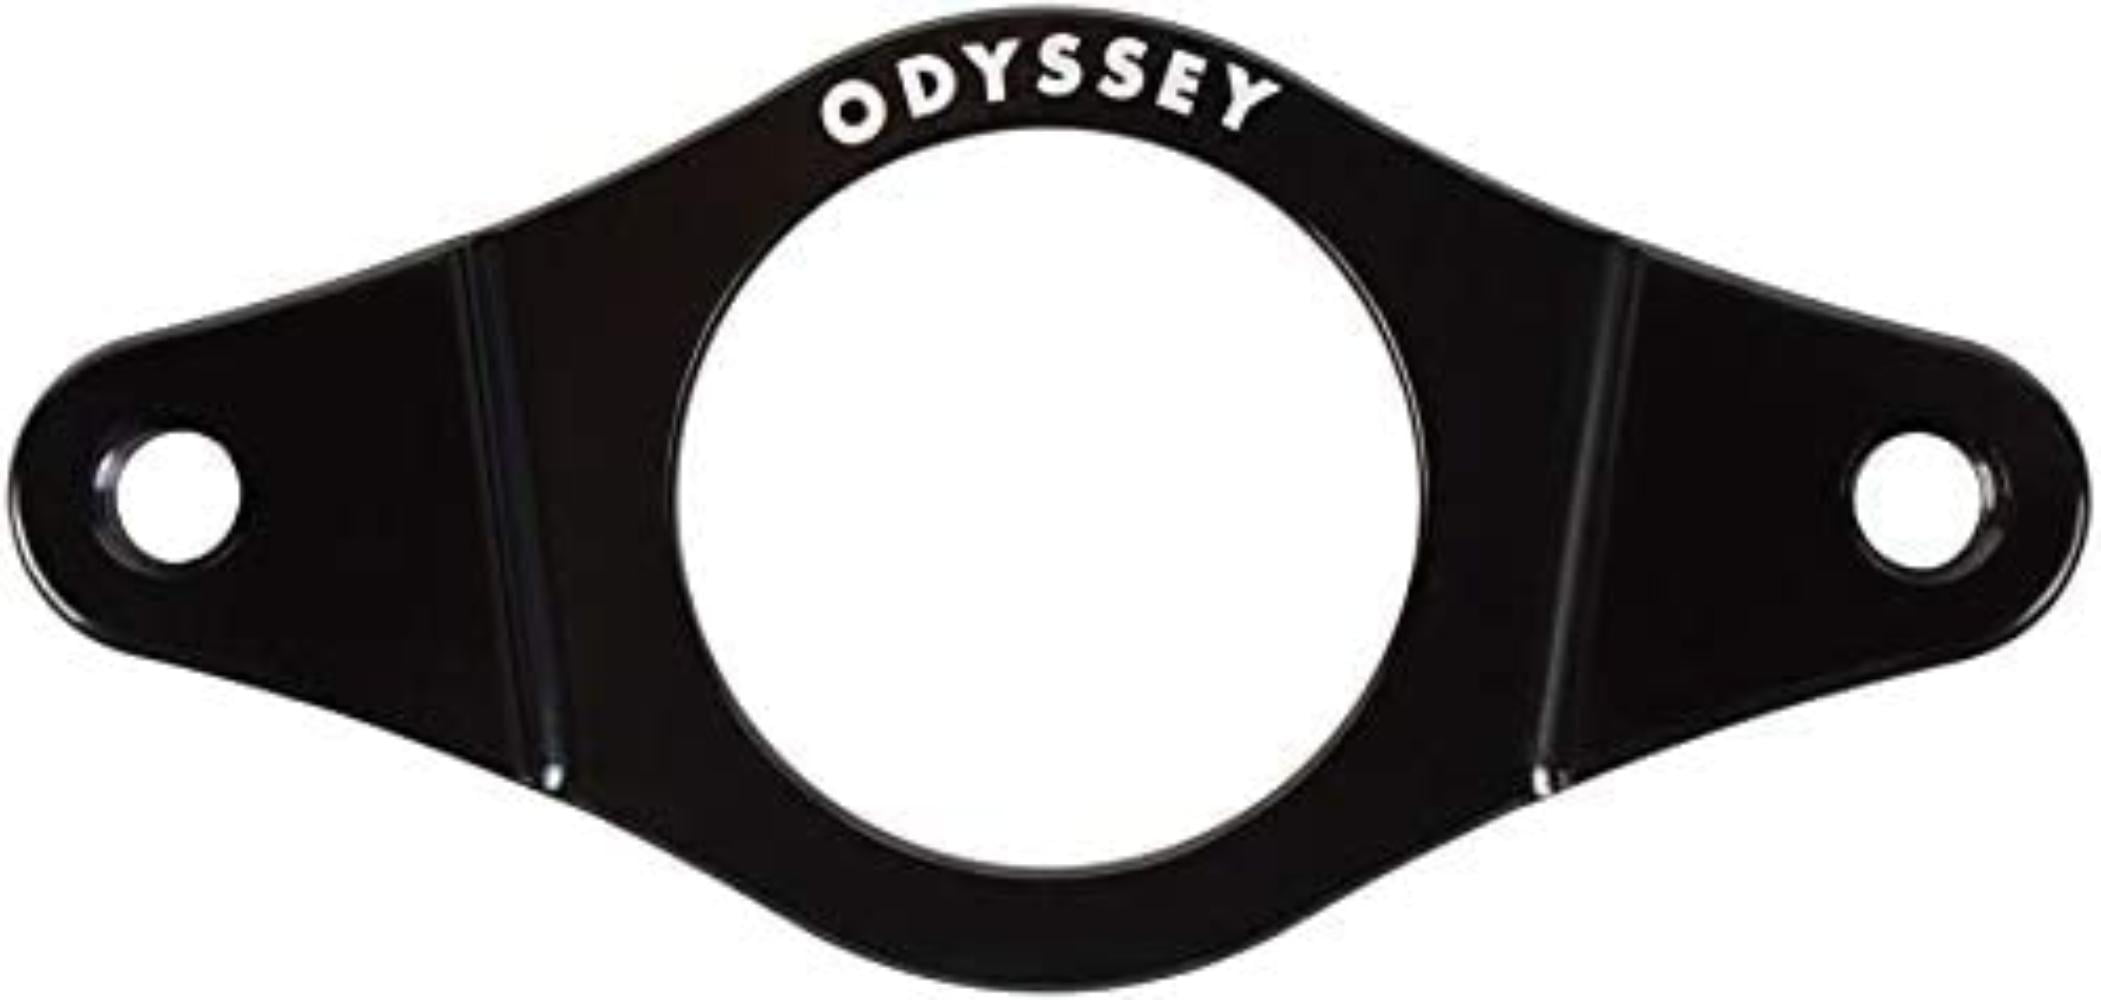 Odyssey Callaway Collections Gyro Upper Plate Black